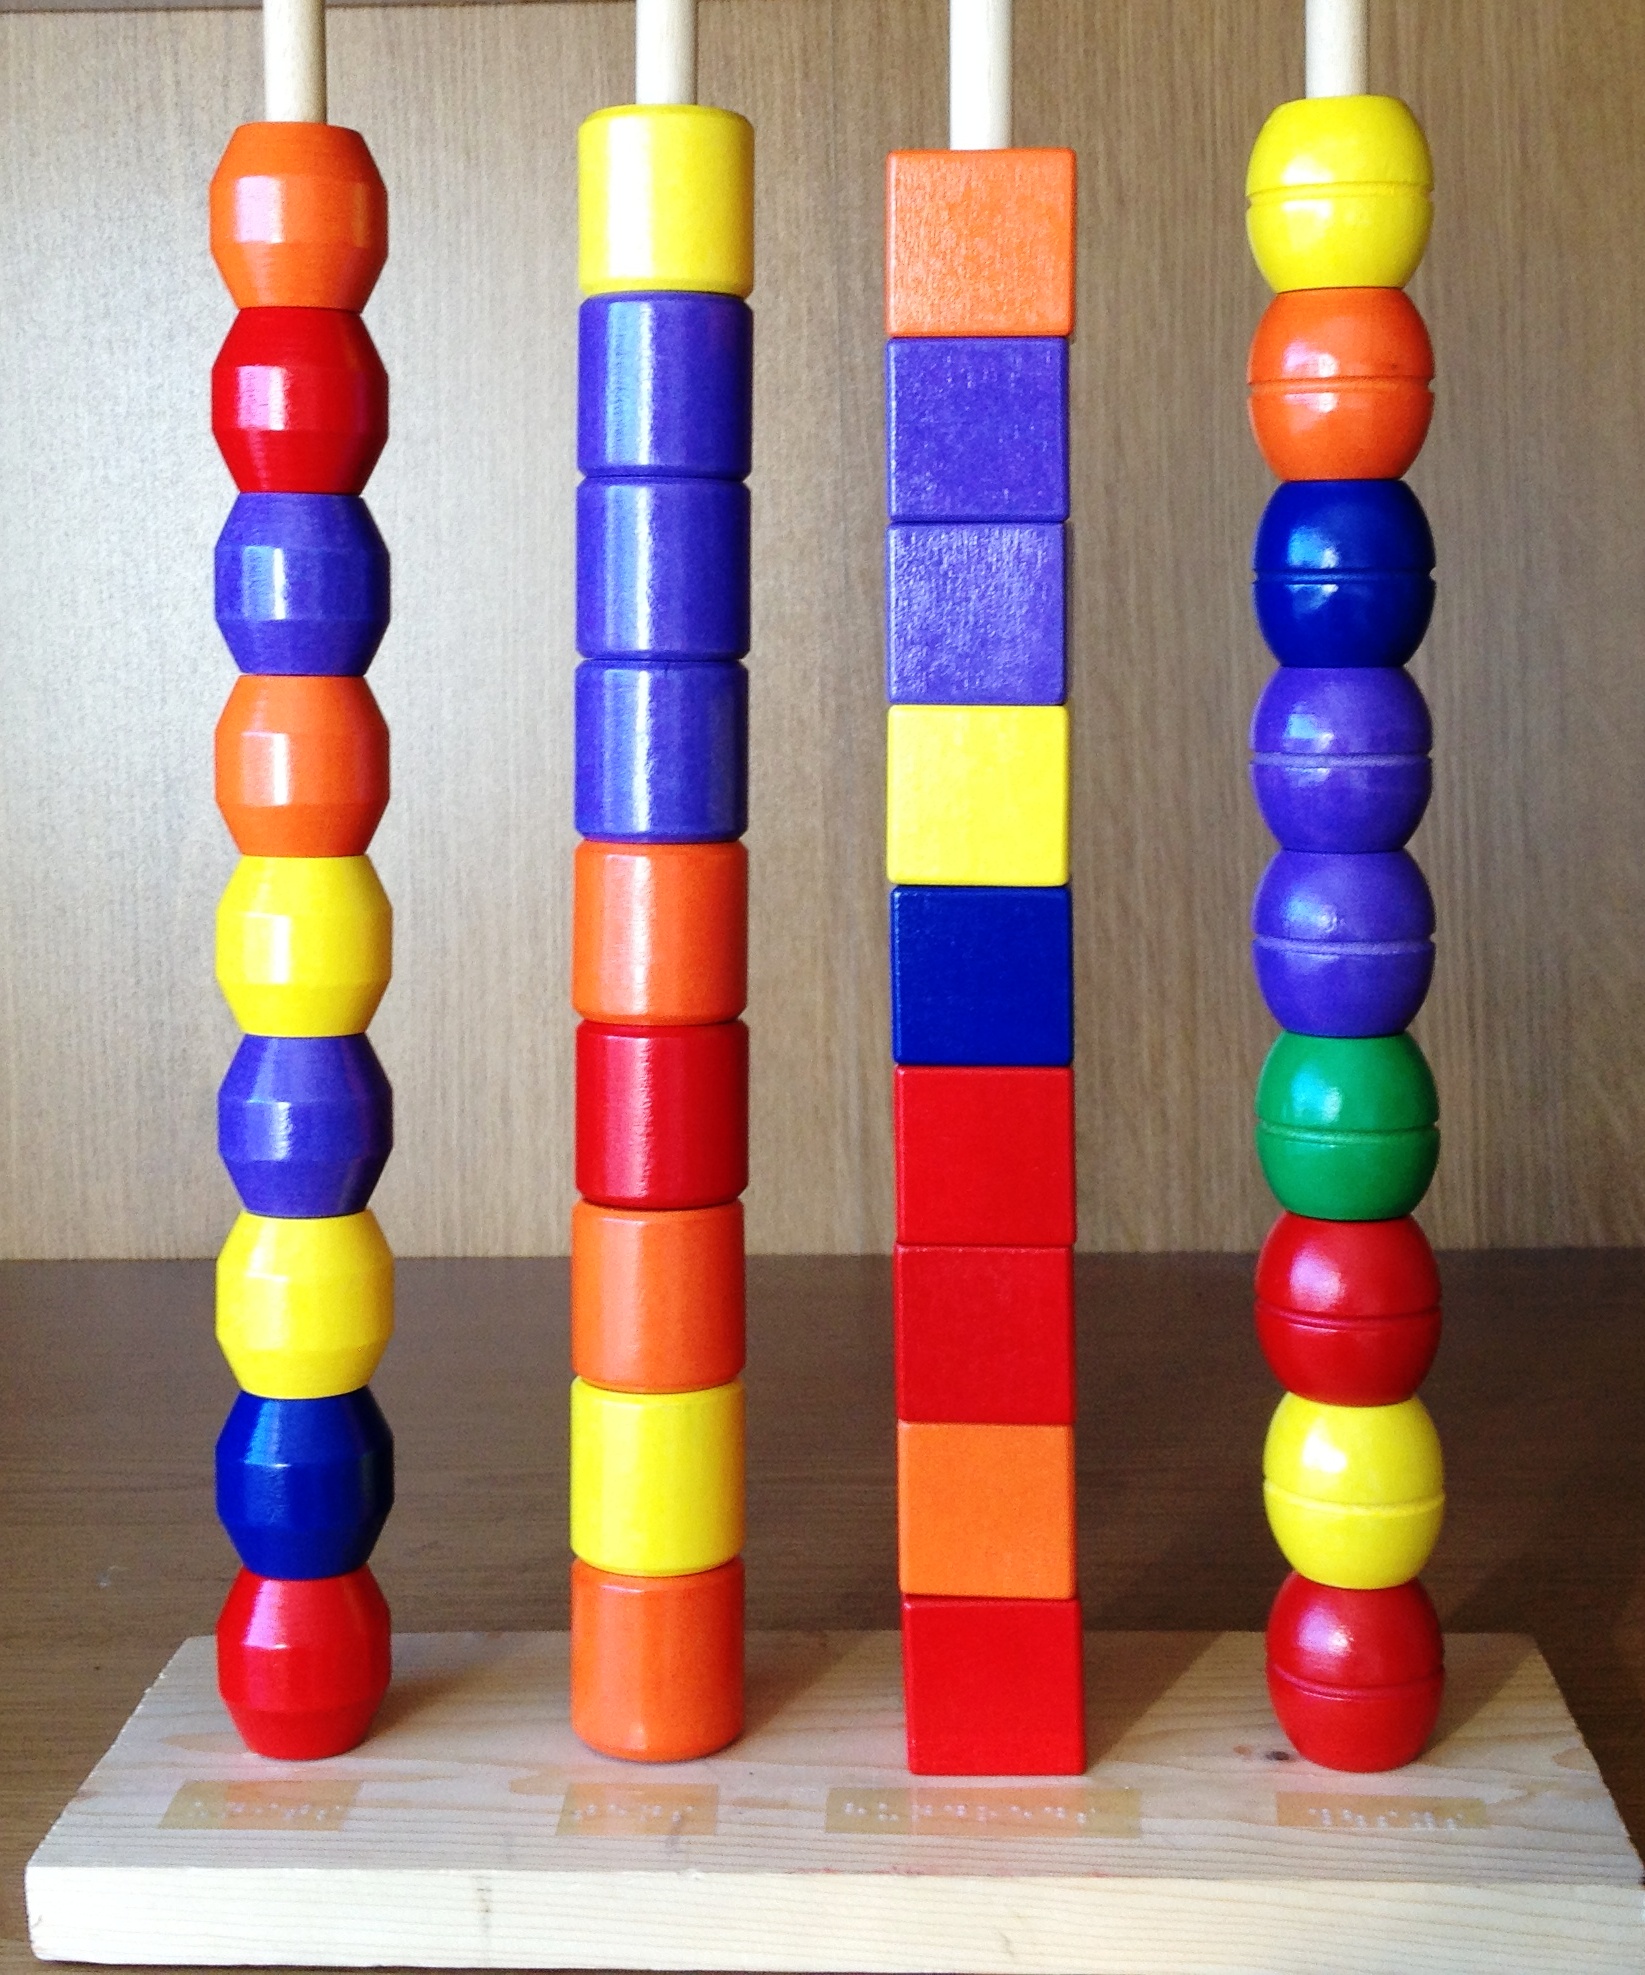 homemade abacus using blocks and dowels